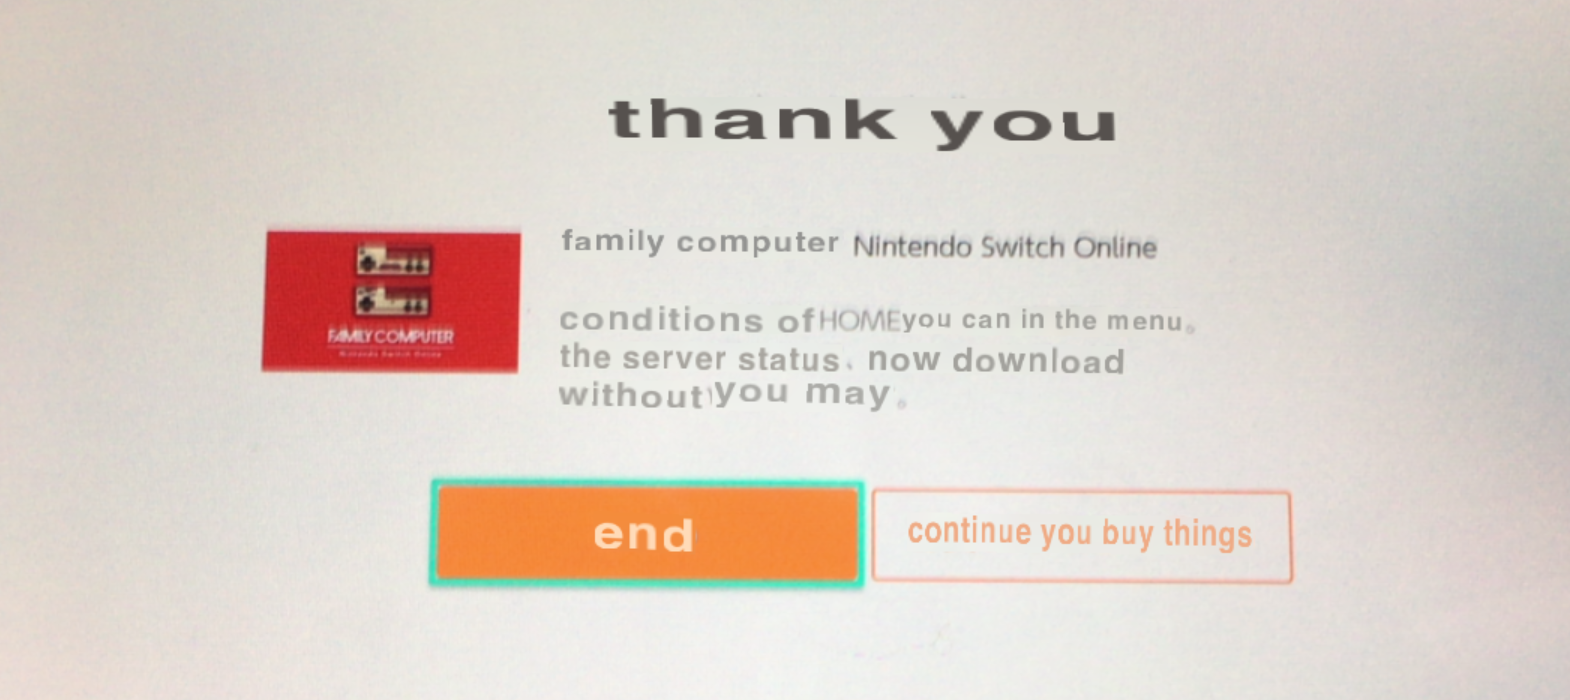 nintendo switch online family computer